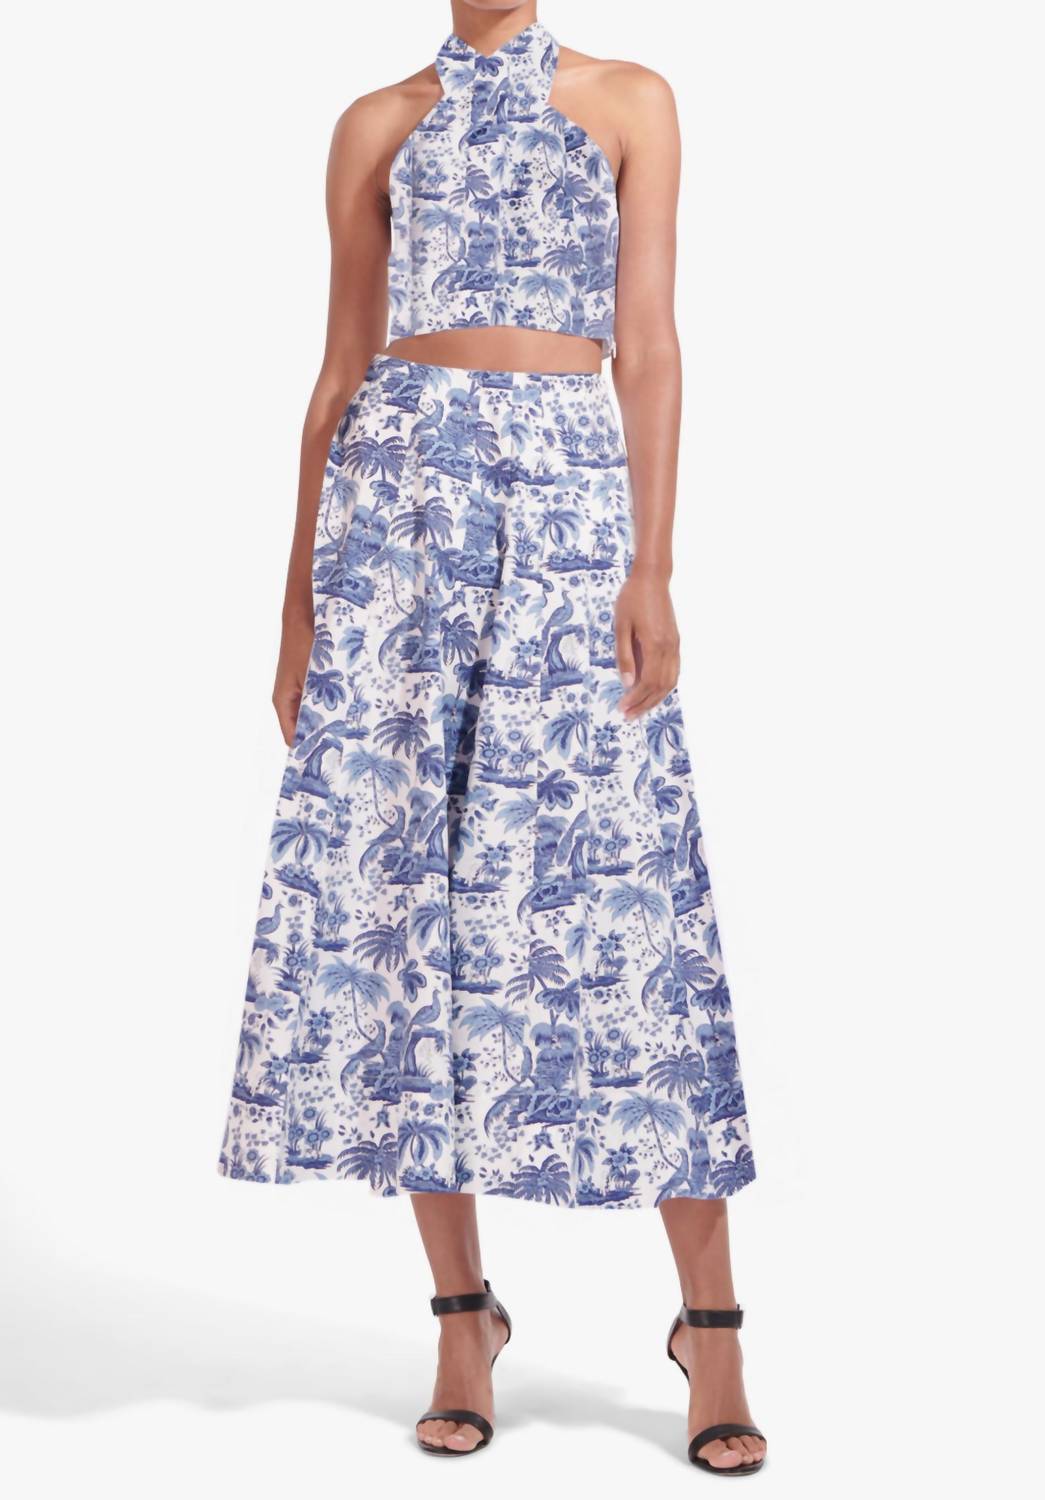 Staud Sea Skirt in Blue Toile | Shop Premium Outlets